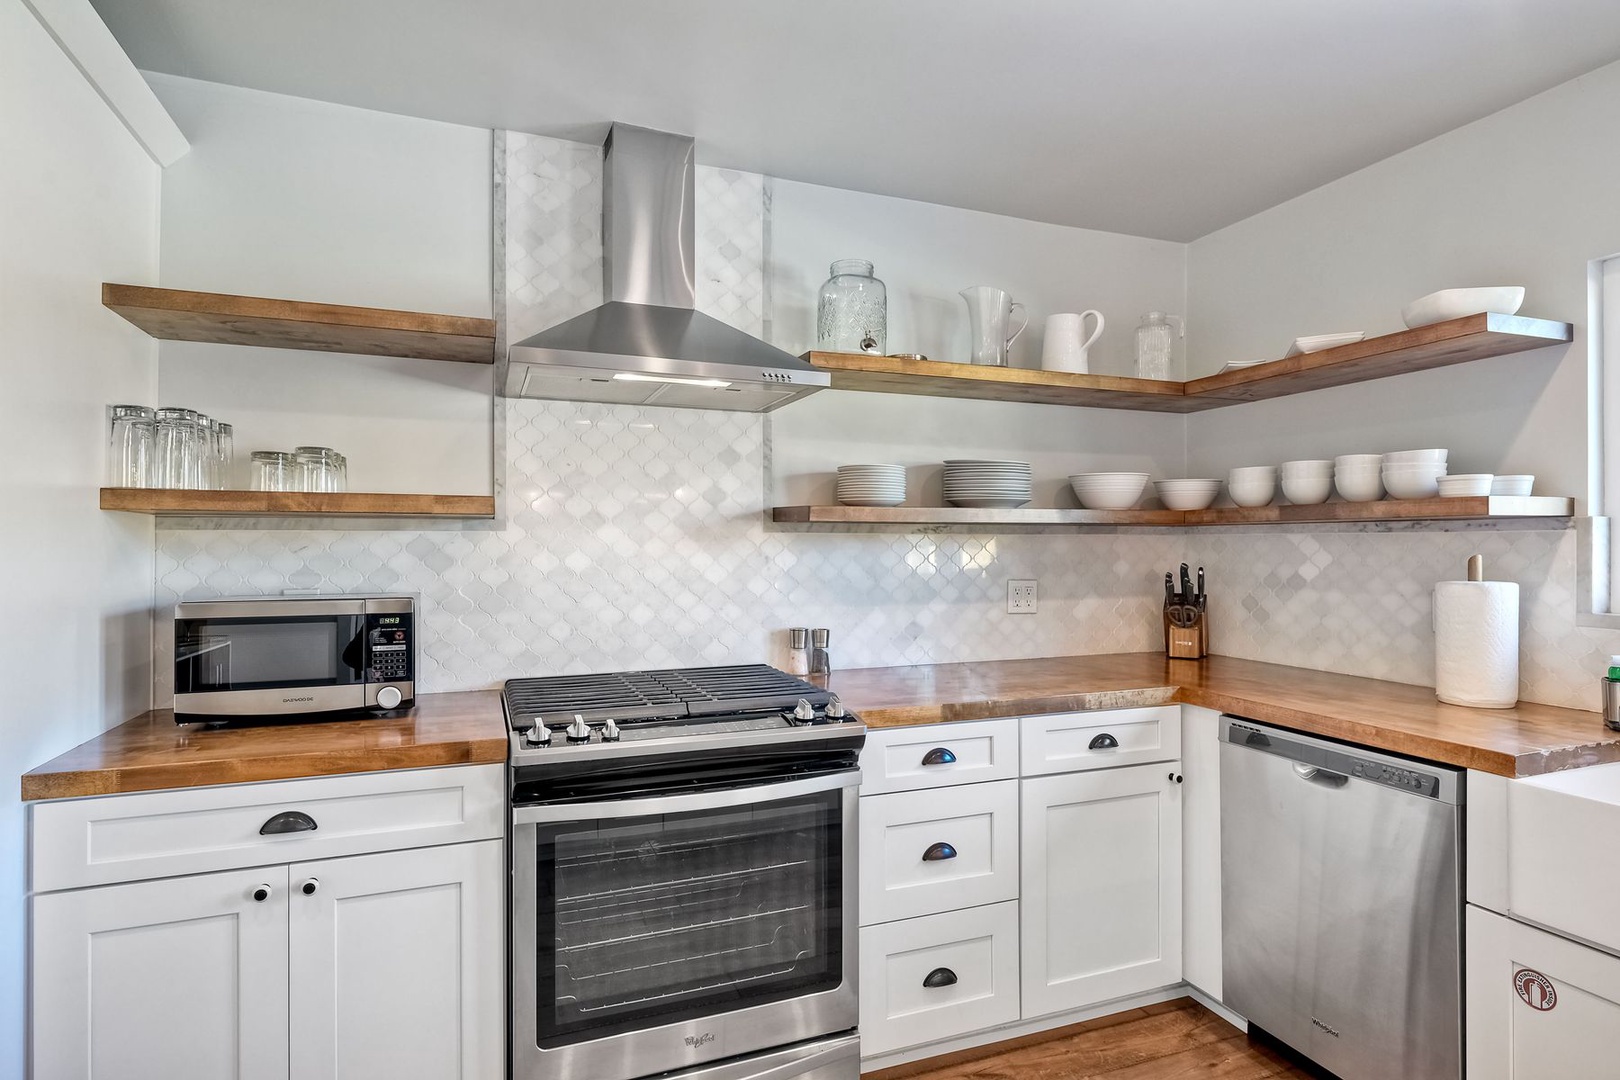 The airy kitchen is spacious & offers all the comforts of home